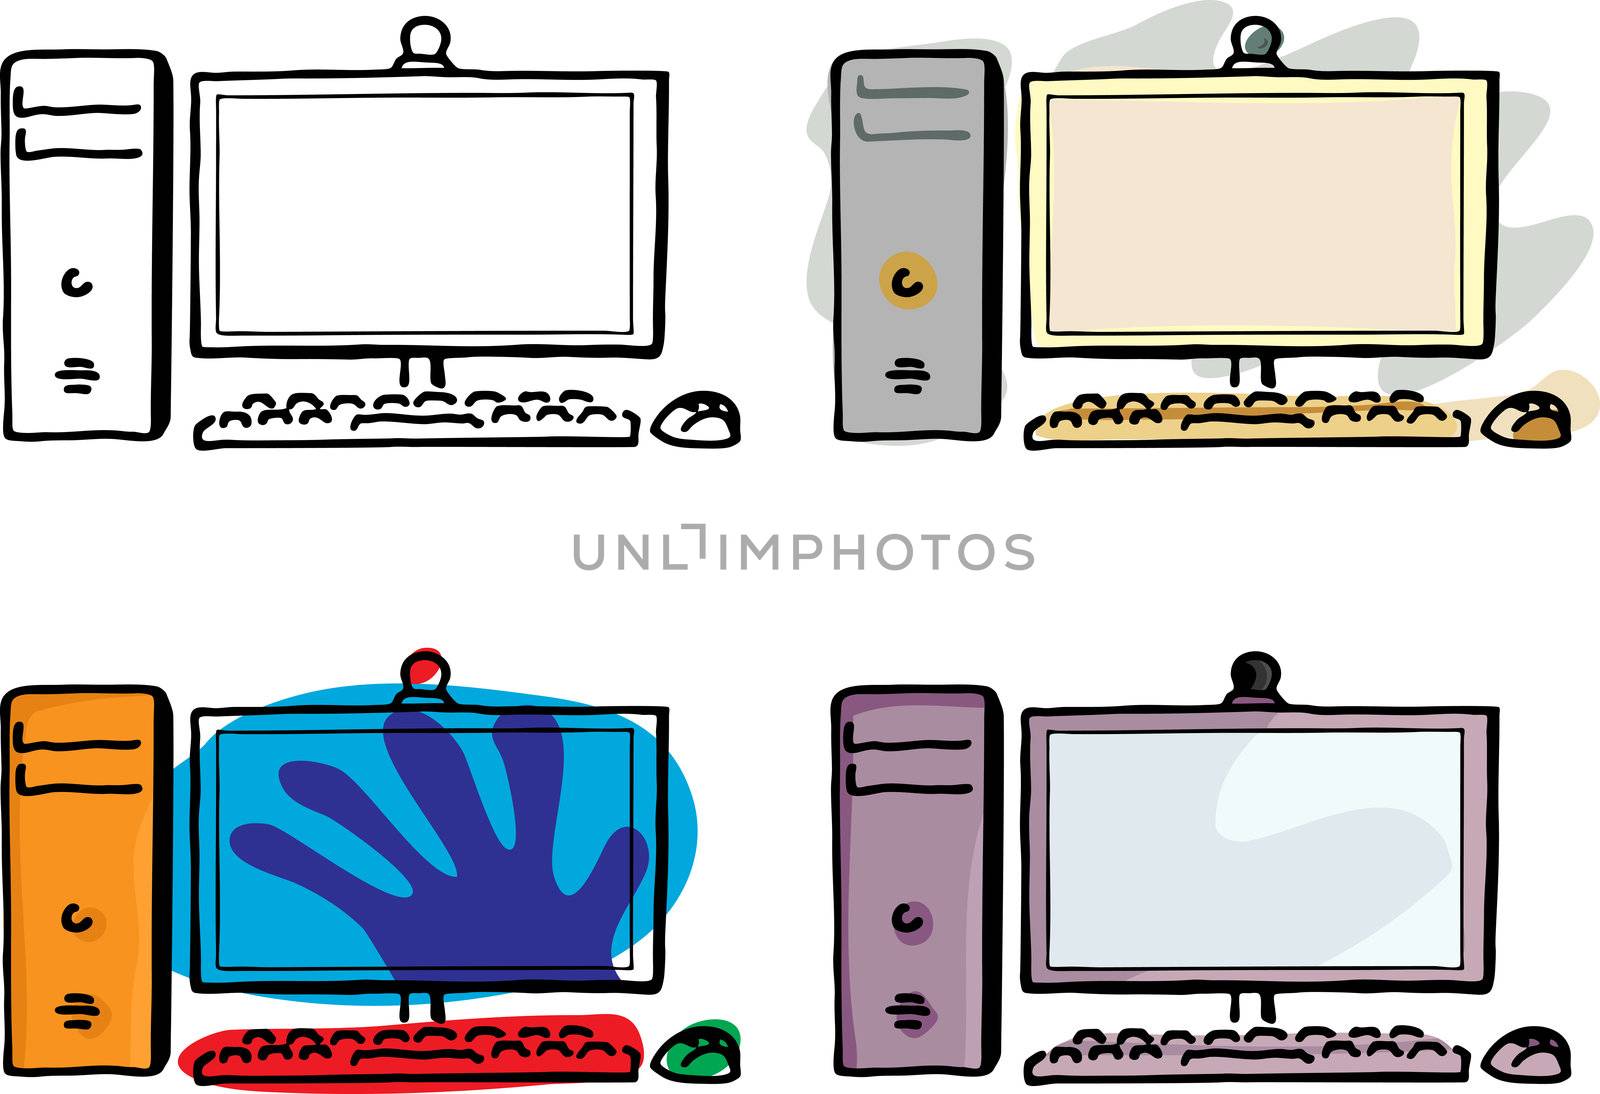 Four variations of a desktop computer with wireless keyboard and mouse.